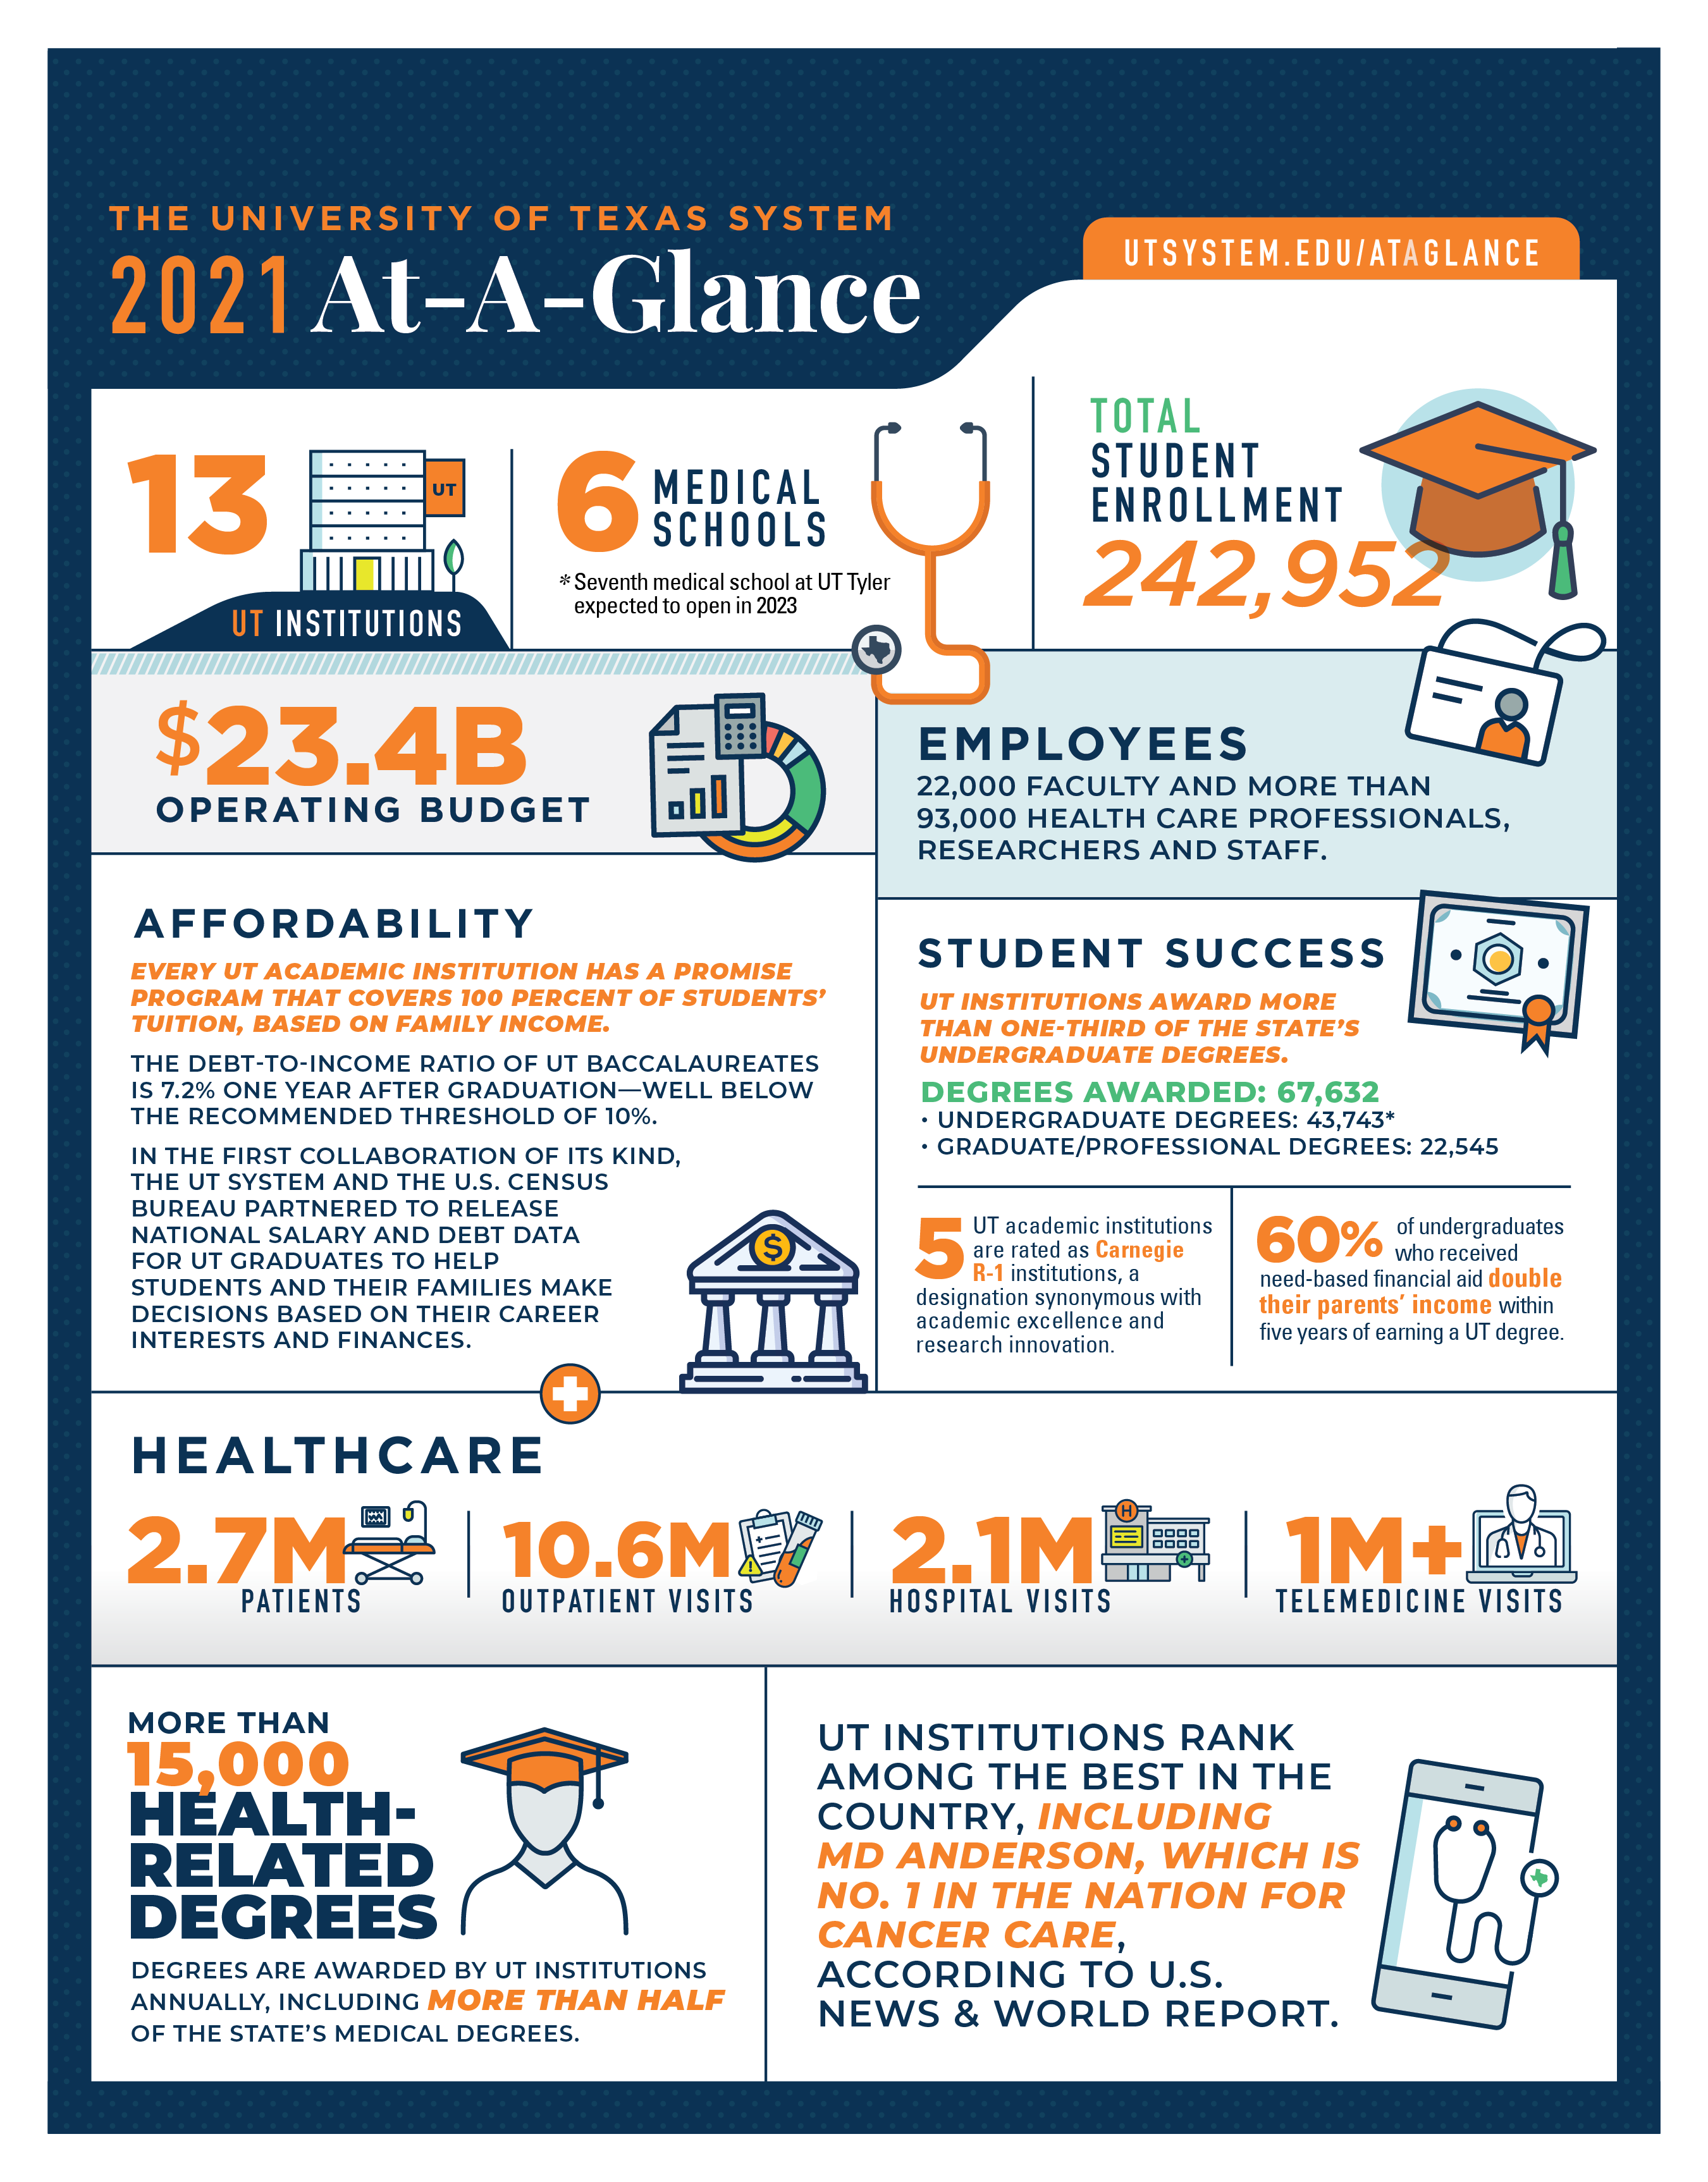 Text on the infographic- Title: The University of Texas System 2021 At-a-Glance. Content: 13 Ut Institutions, 6 medical schools with a seventh school at UT Tyler expected to open in 2023. Total student enrollment 242,952. $23.4 billon operating budget. UT Institutions award more than 1/3rd of the state’s undergraduate degrees.